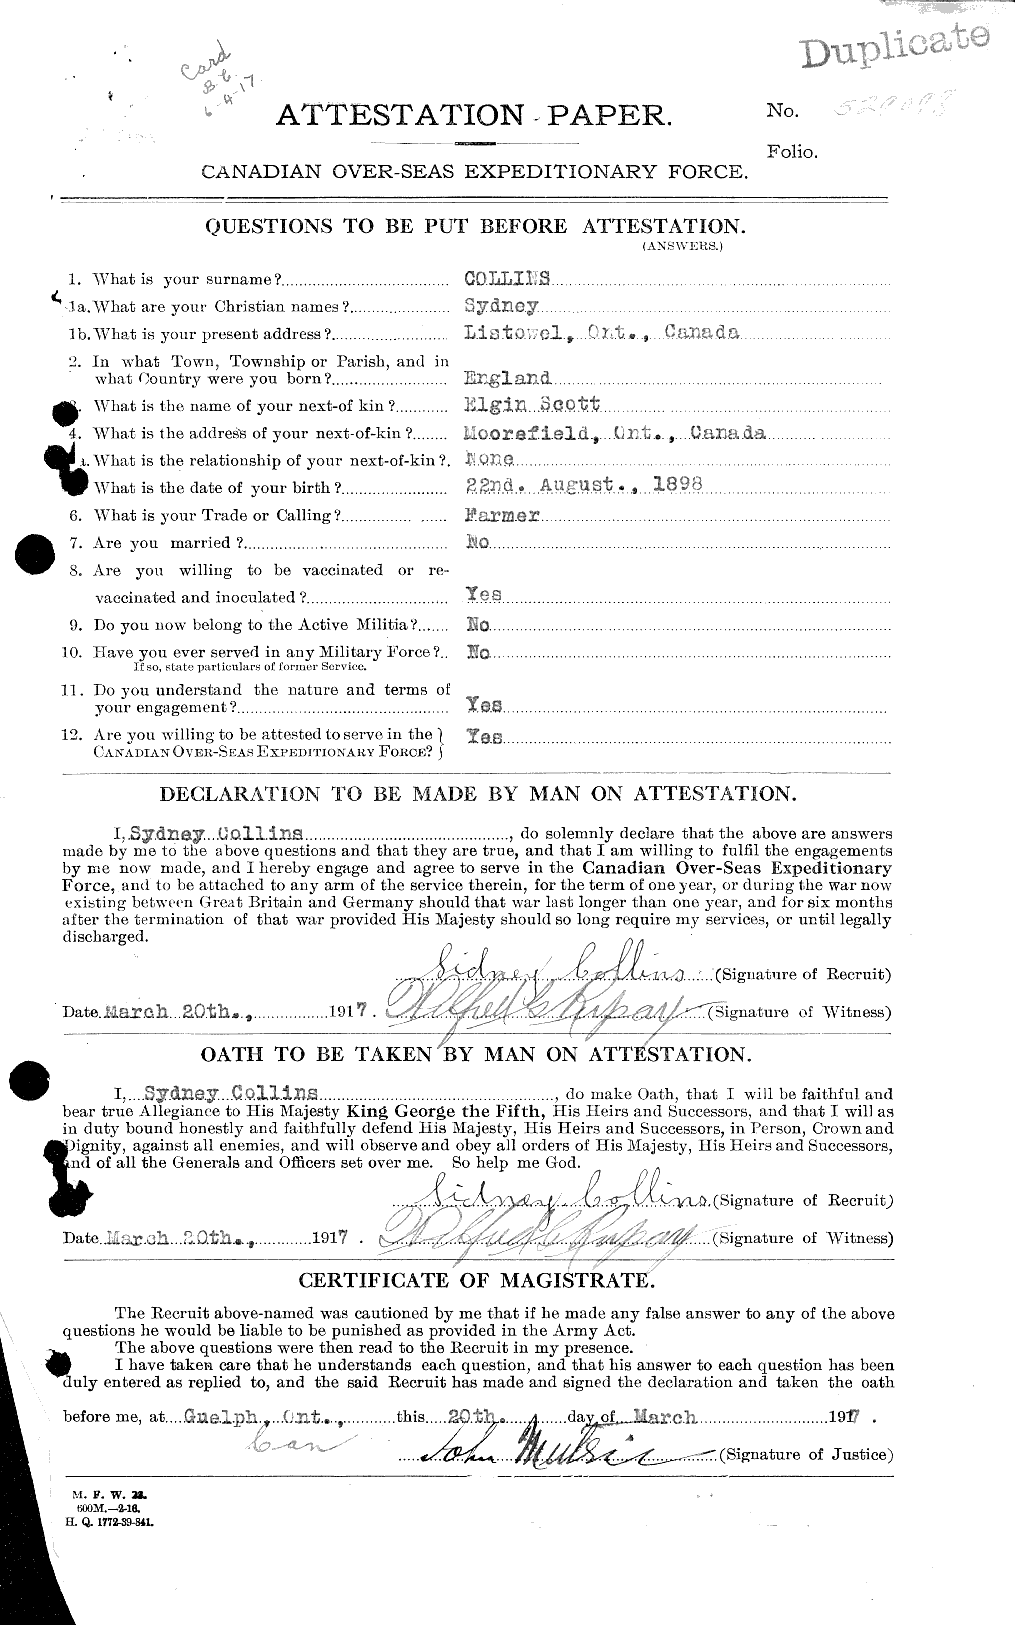 Personnel Records of the First World War - CEF 034544a